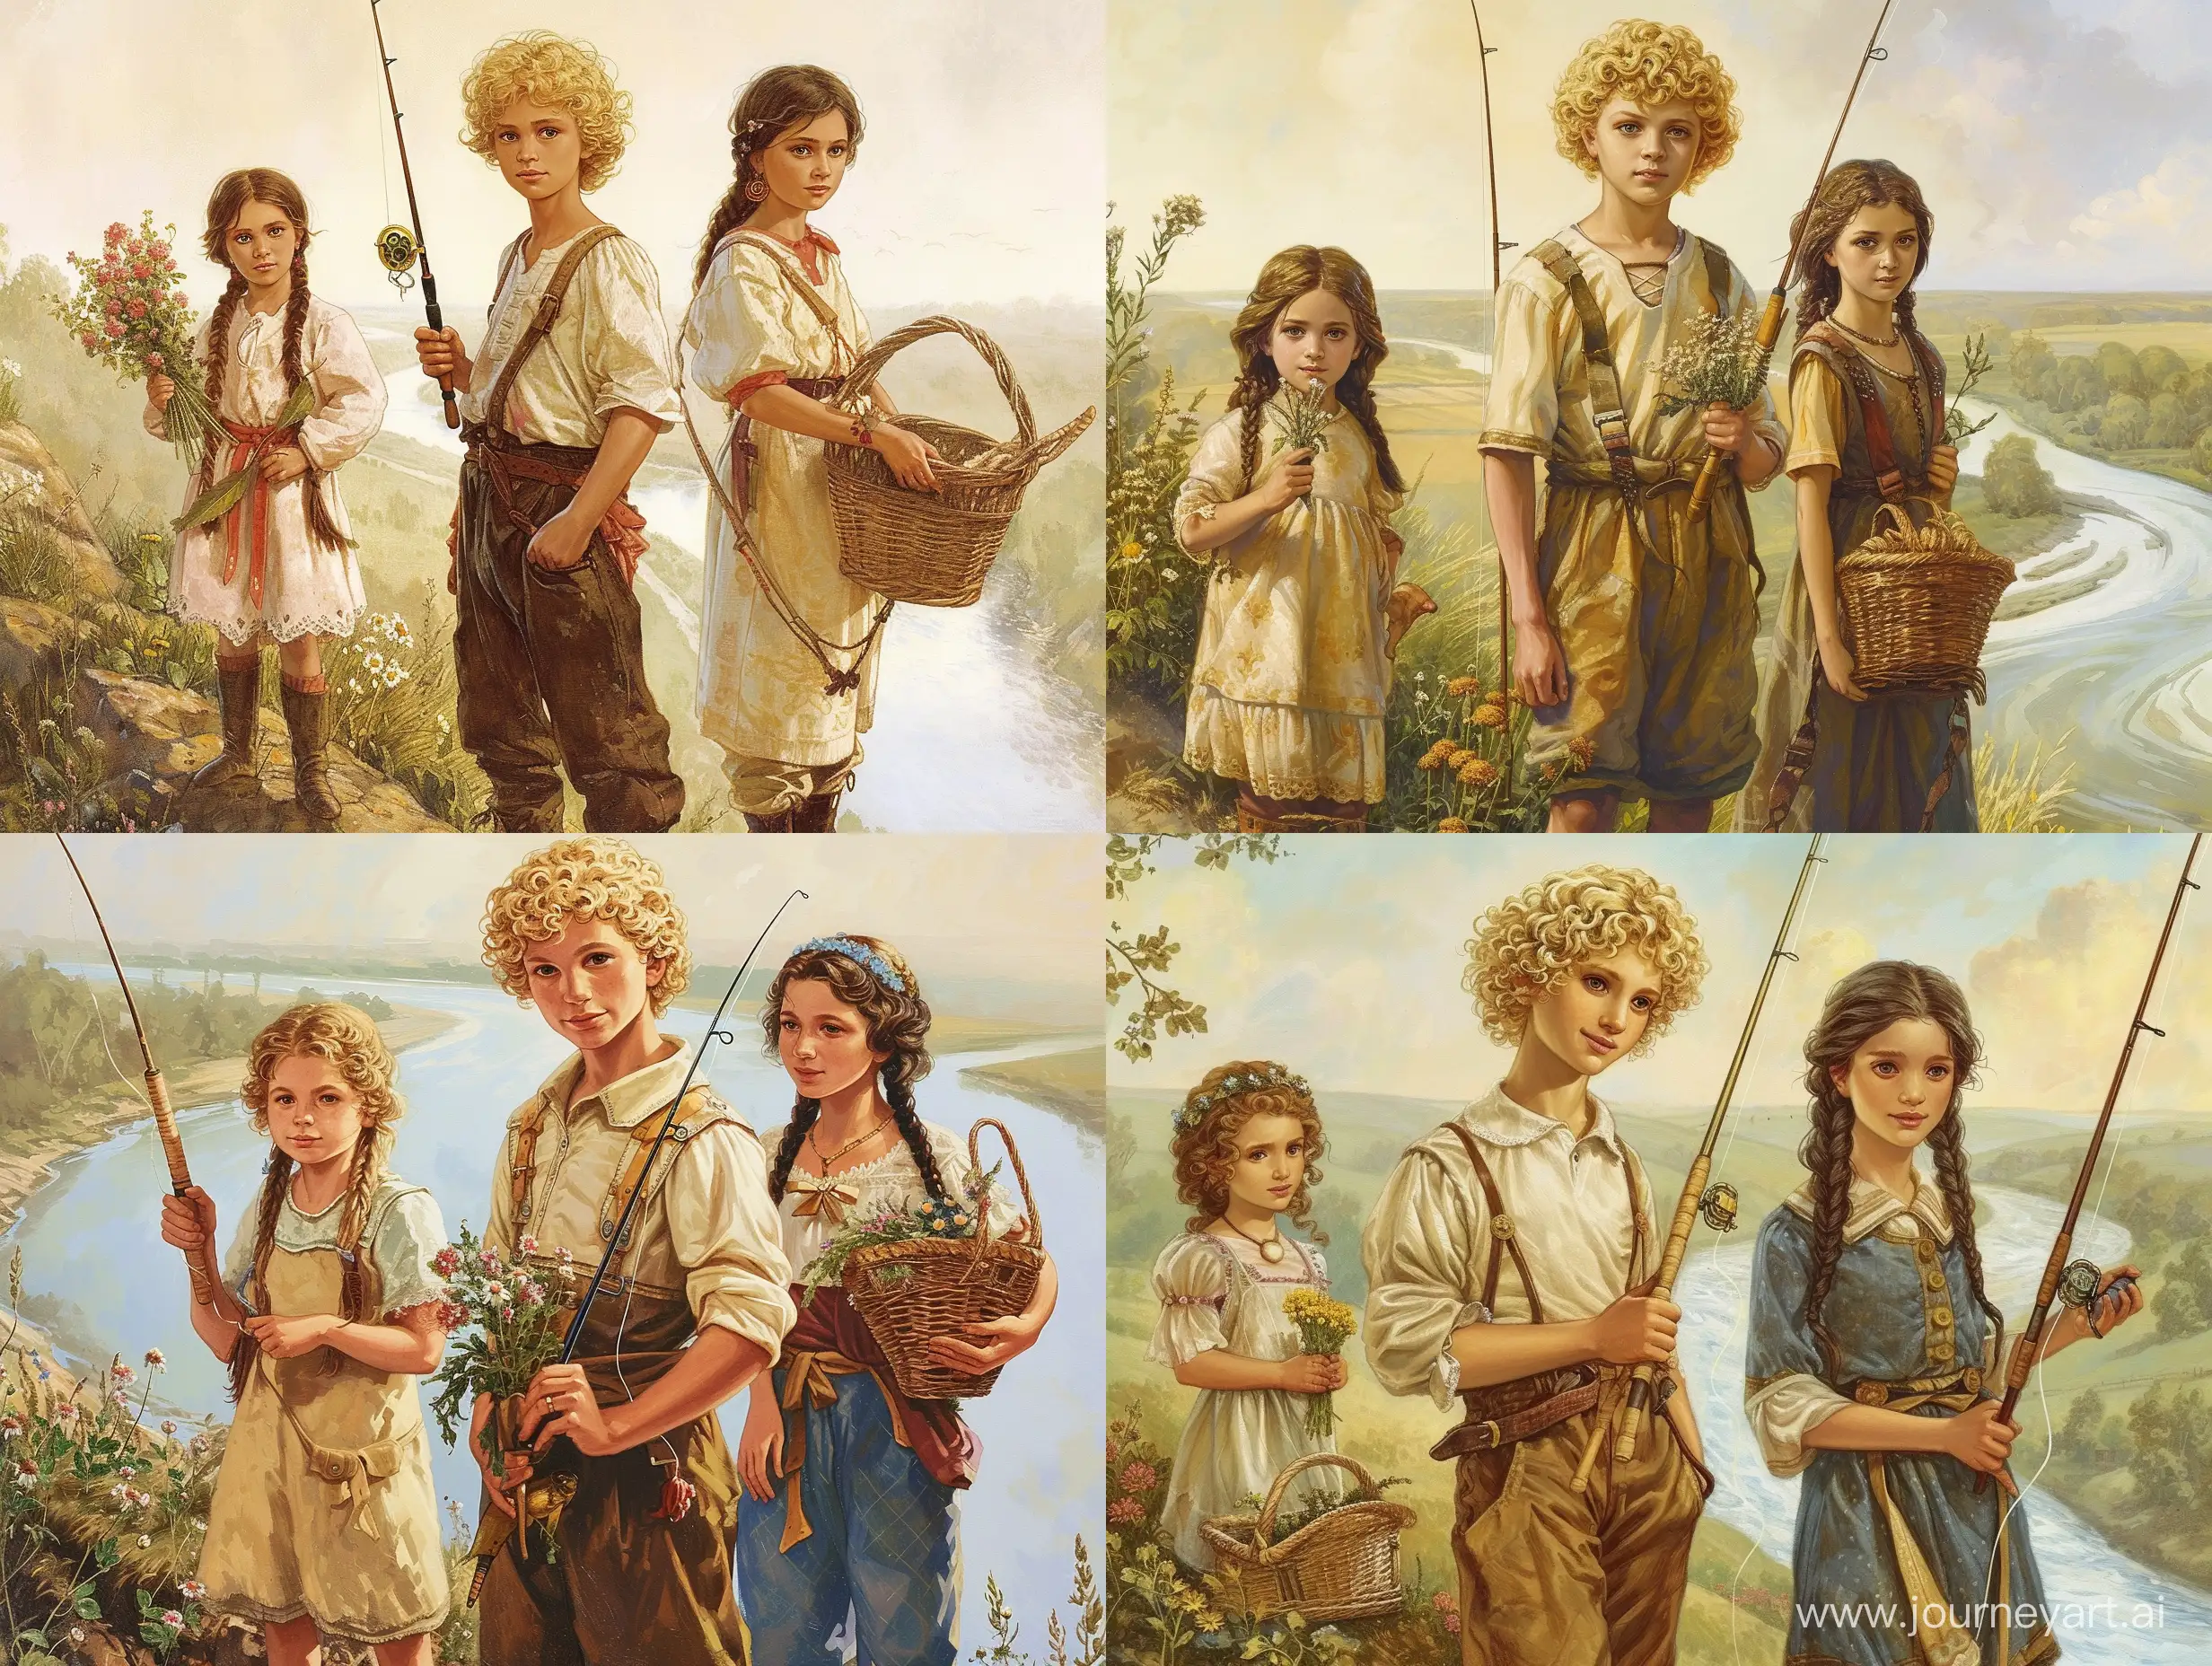 book illustration, three people, S. Yesenin, a thirteen-year-old with blond curly hair holding a fishing rod in his left hand, a five-year-old girl with dark hair braided, stands to the left of the boy, holding wildflowers in her left hand, a sixteen-year-old girl with dark hair braided, stands to the right of the boy, holding in her left hand A wicker basket in her right hand, dressed in peasant clothes, stands on a hill, against the background of a winding river, sunny day, summer, noon, v - 6